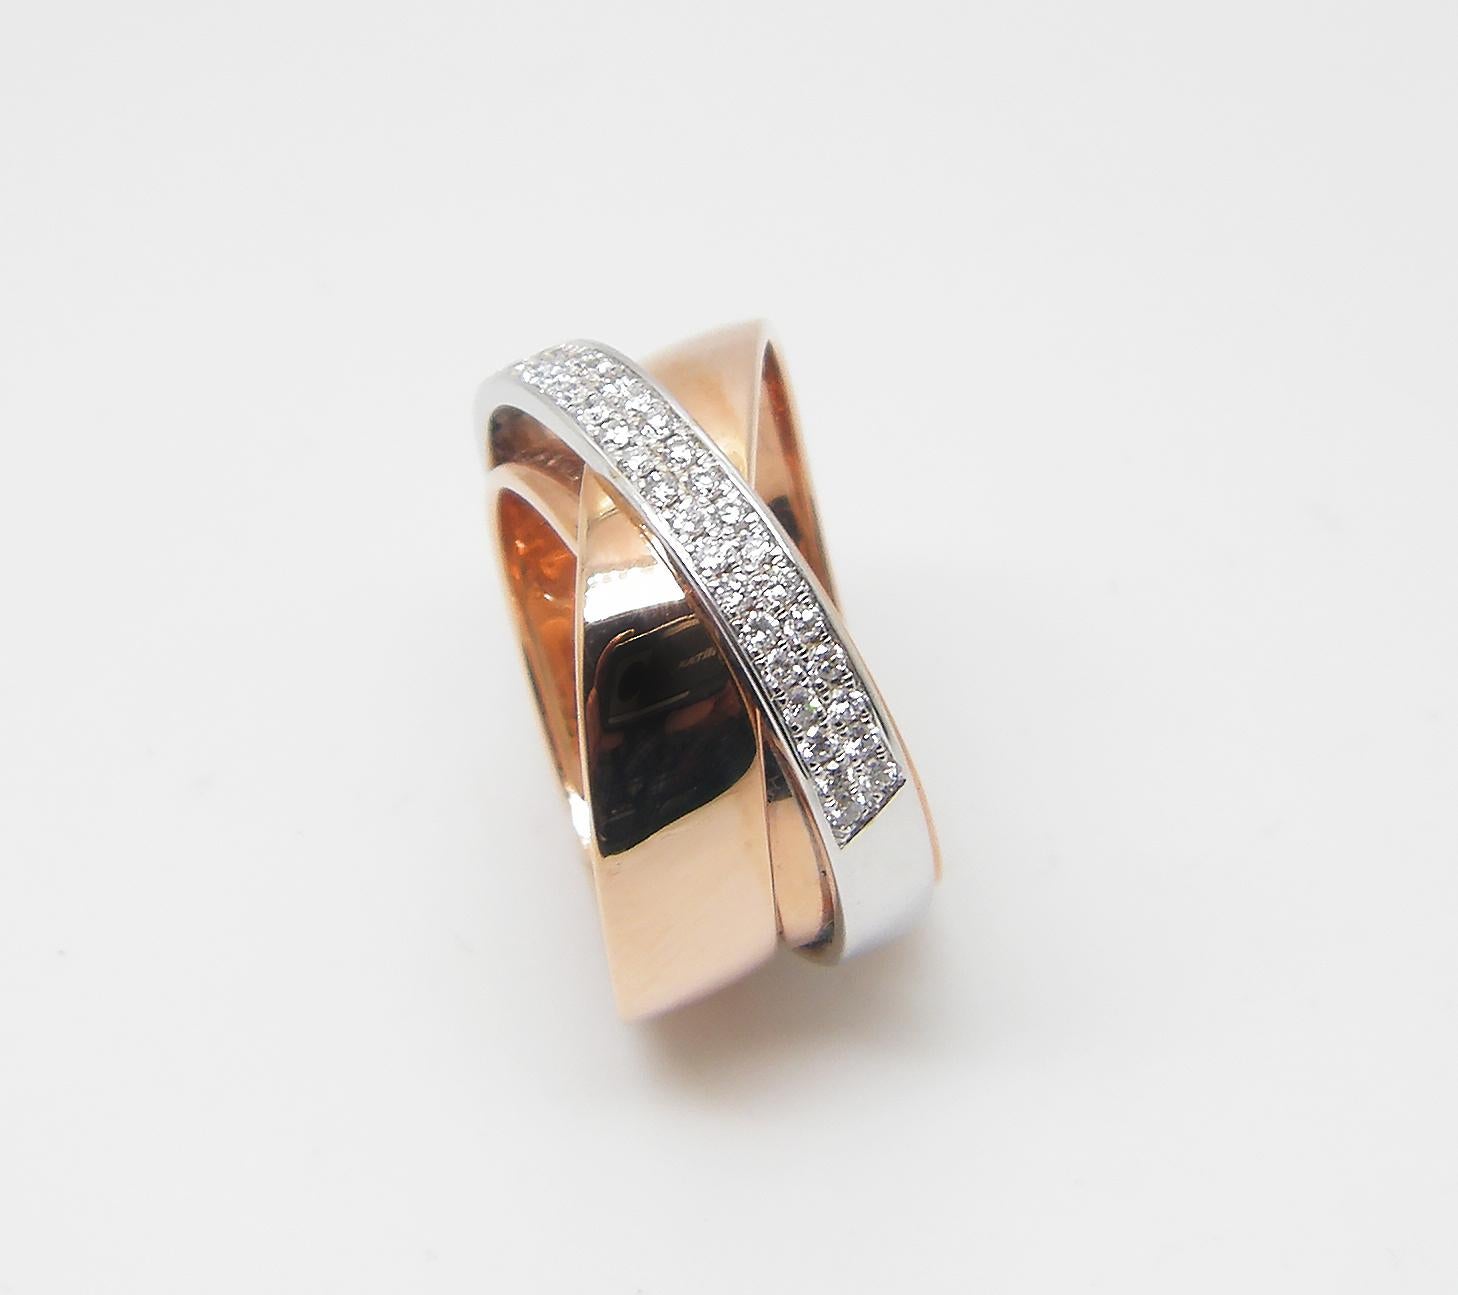 S.Georgios designer 18 Karat rose gold and white gold two-tone diamond band ring is all handmade in a unique design of three rings combined together. The gorgeous band features brilliant cut white diamonds total weight of 0.32 Carat in a microscopic